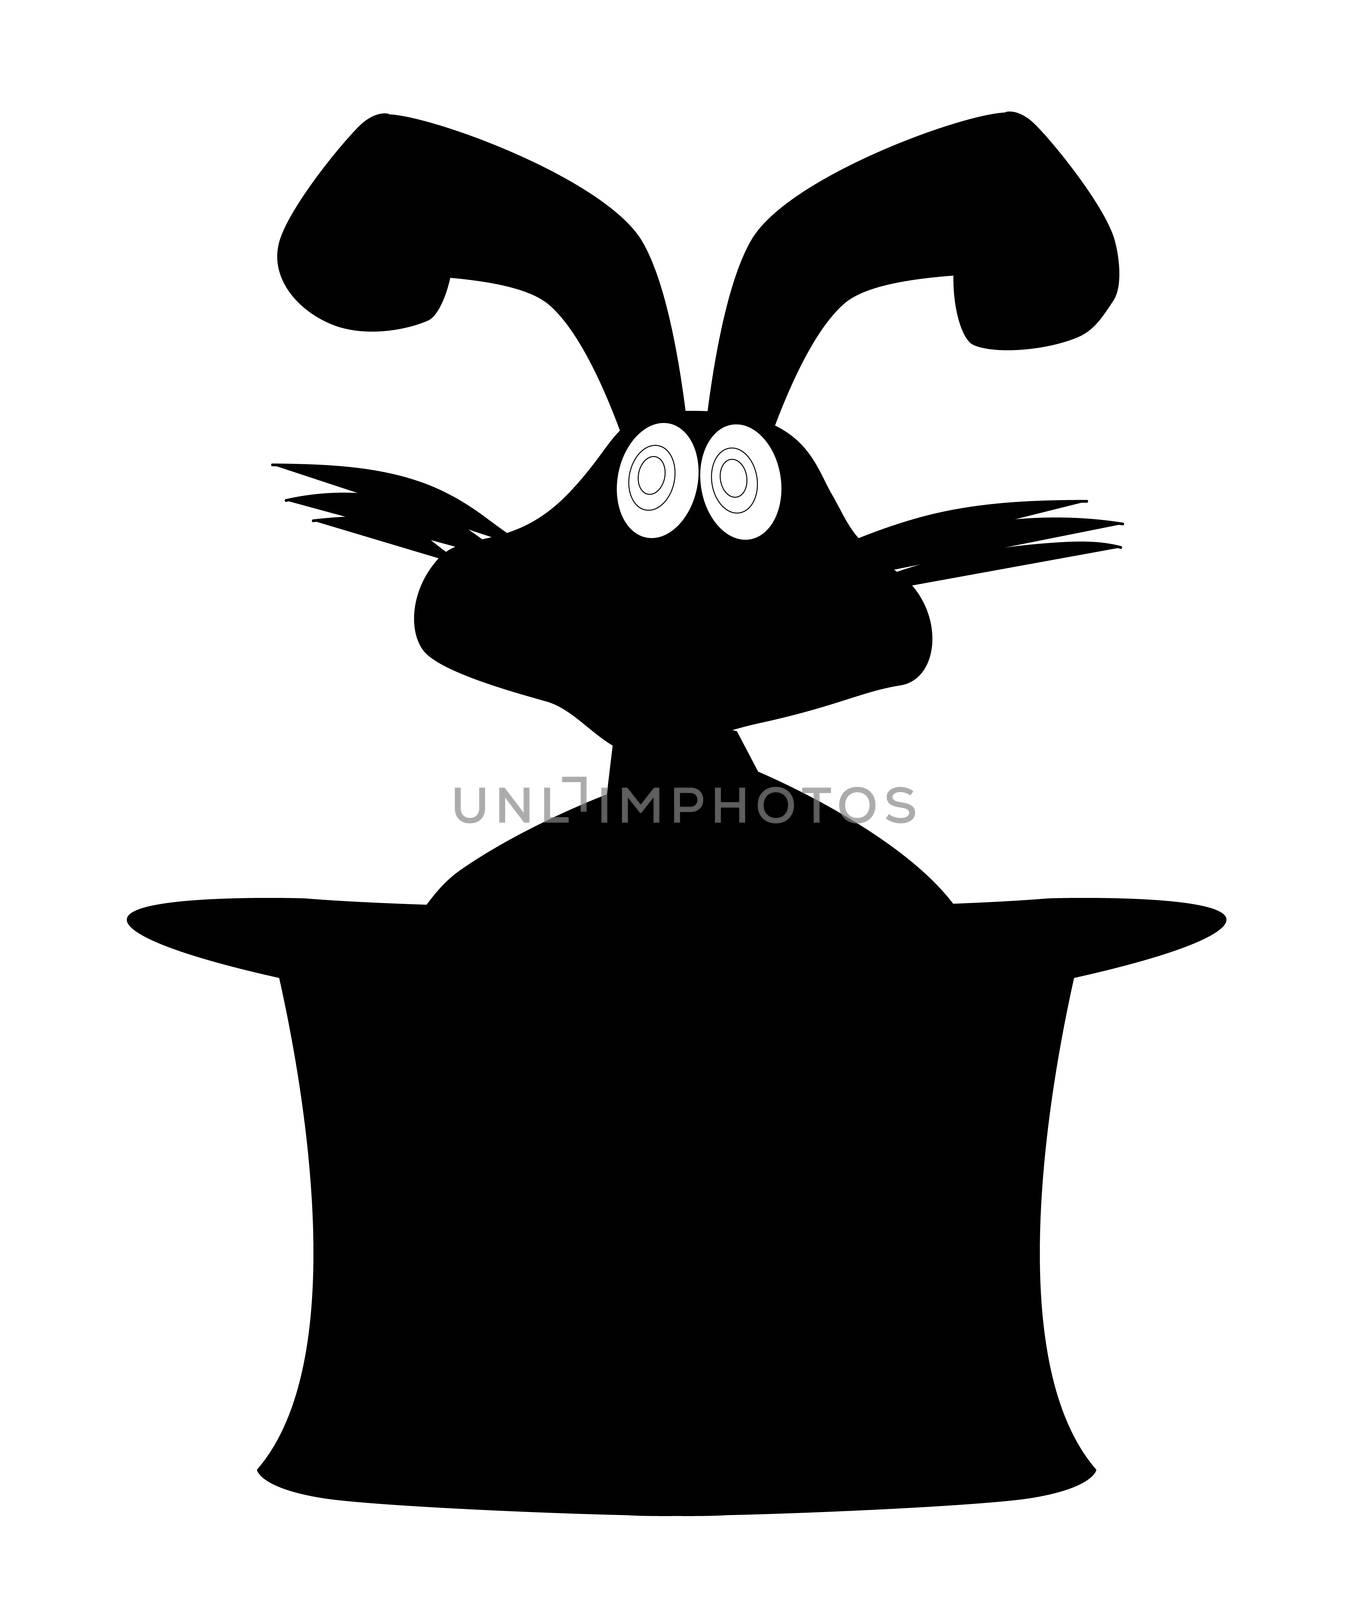 A magicians hat and wand with cartoon rabbit over a white background